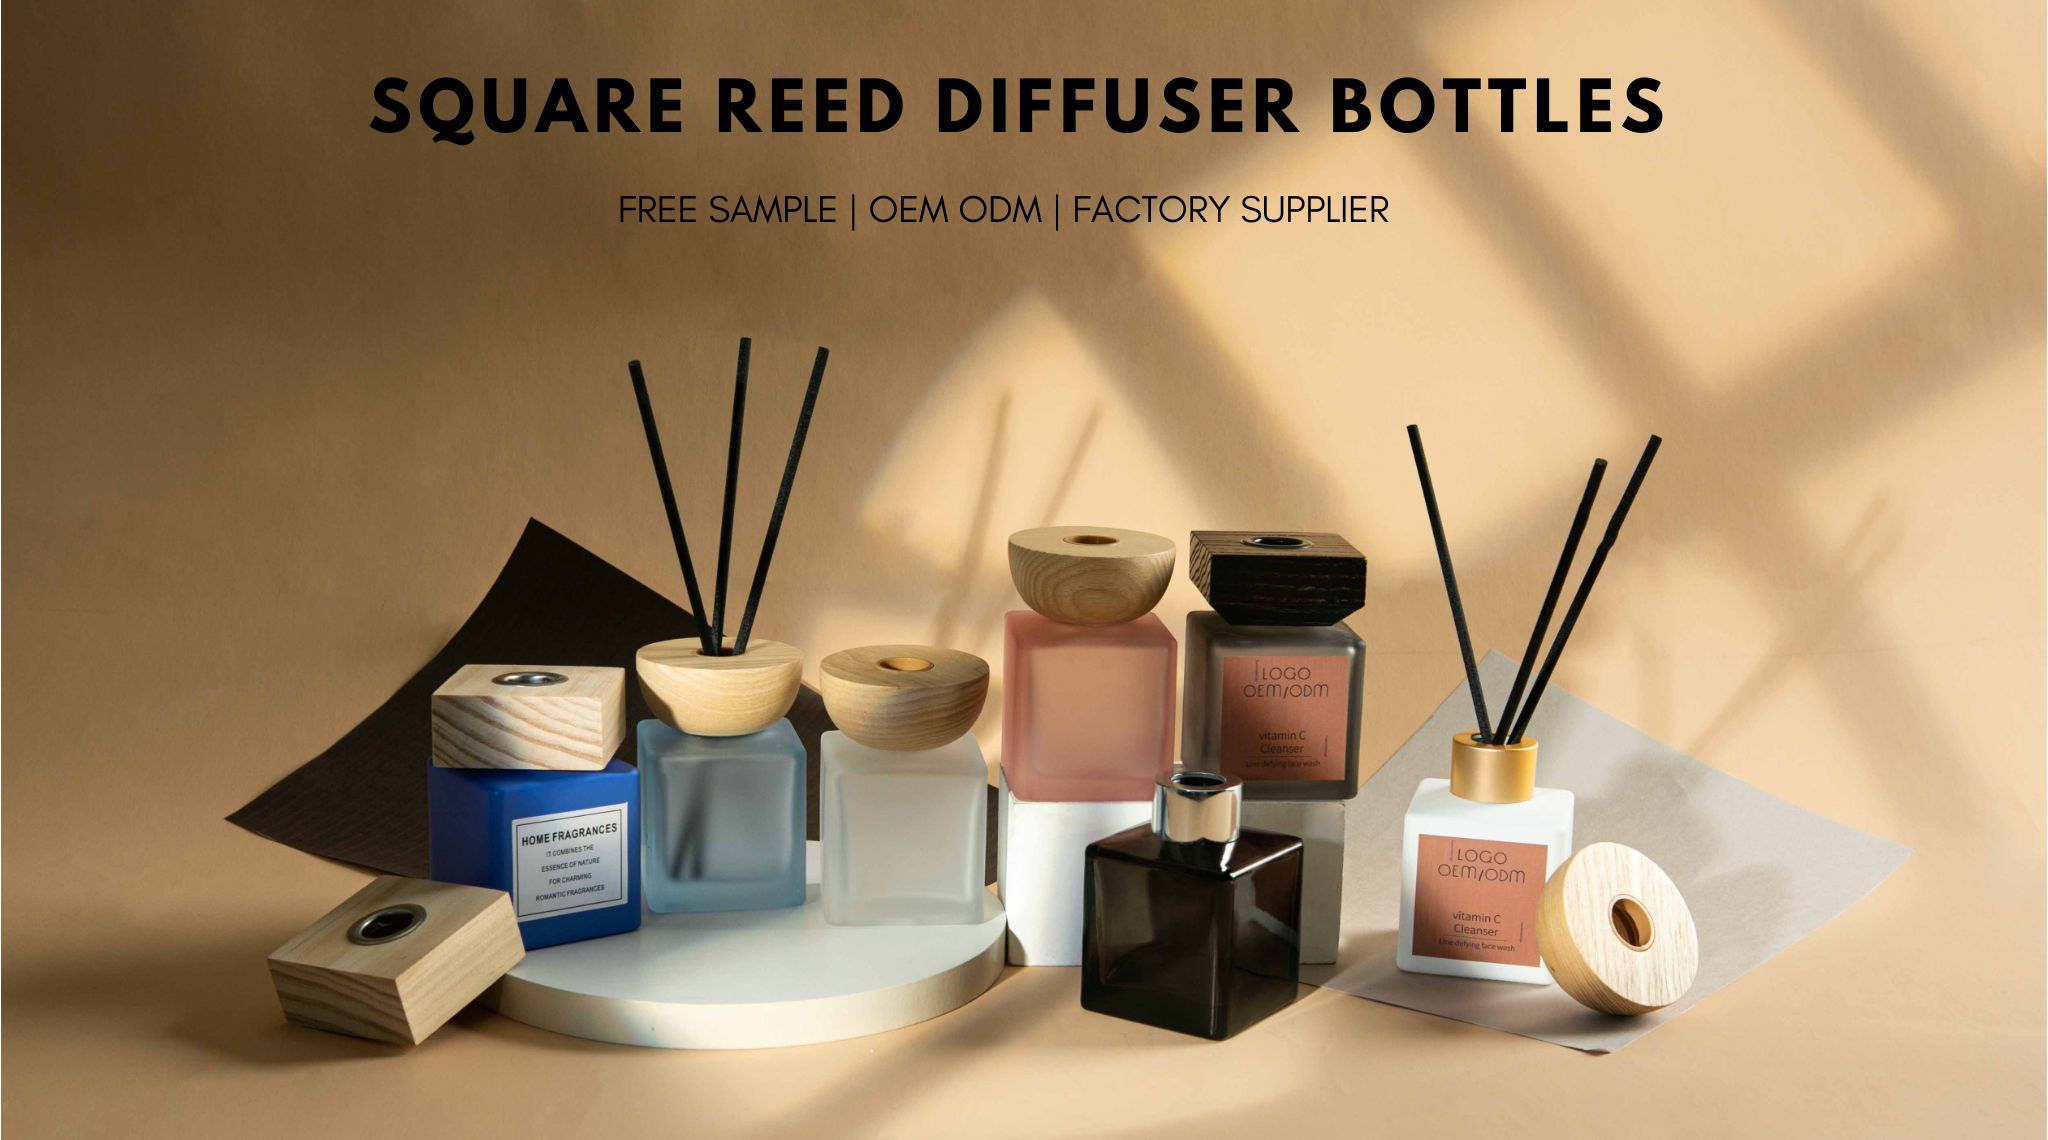 Square reed diffuser bottles